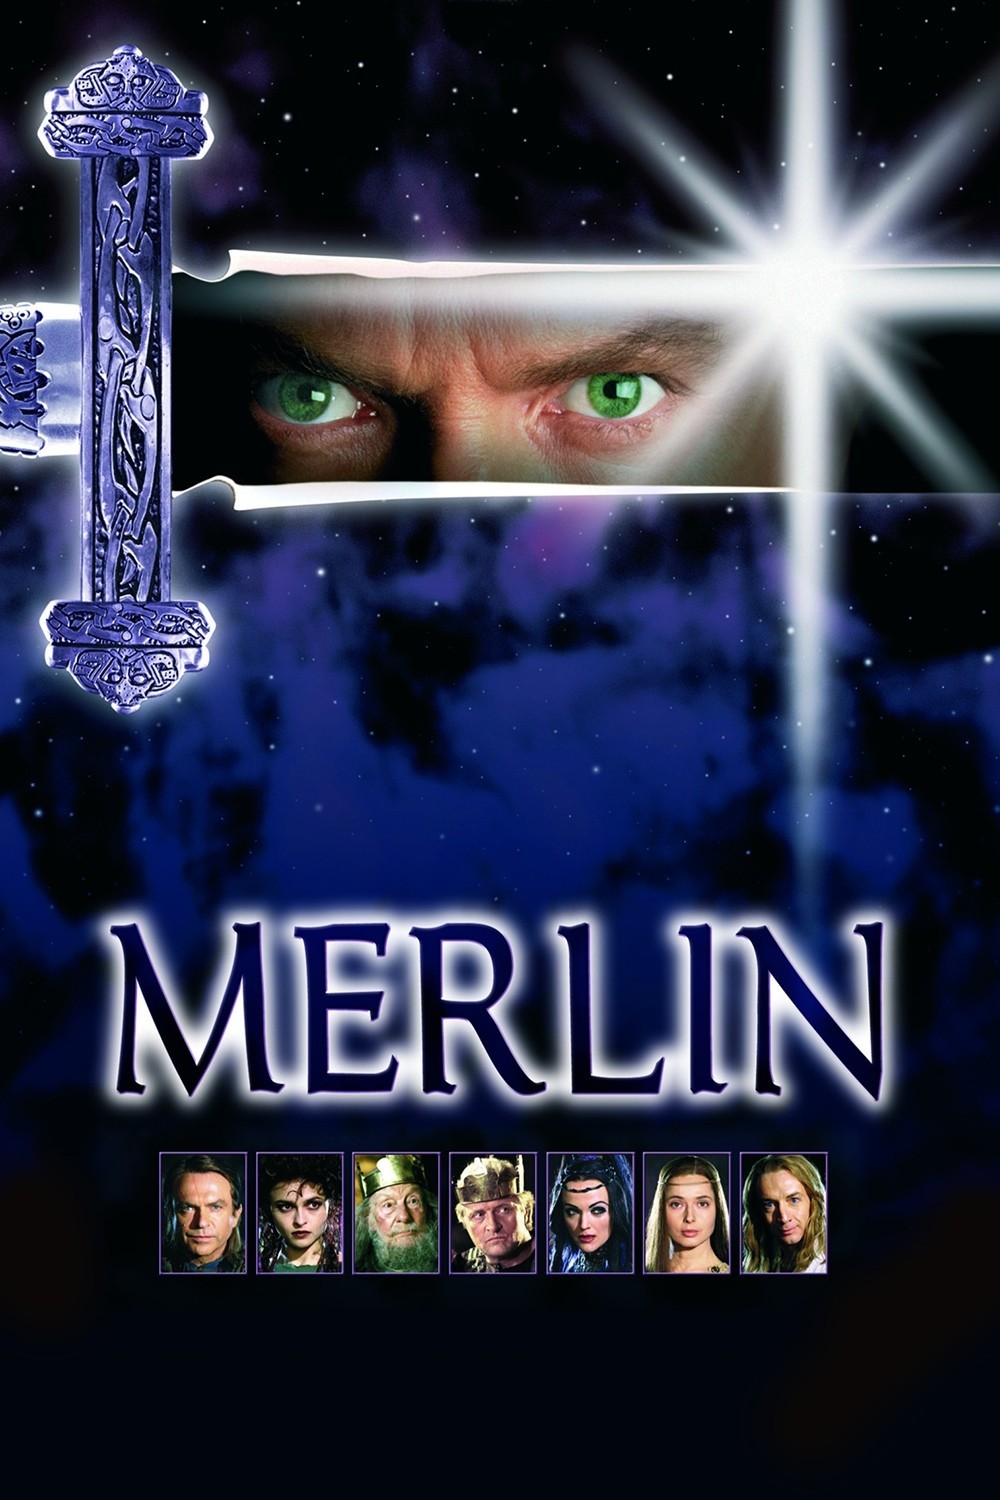 Poster for the movie "Merlin"